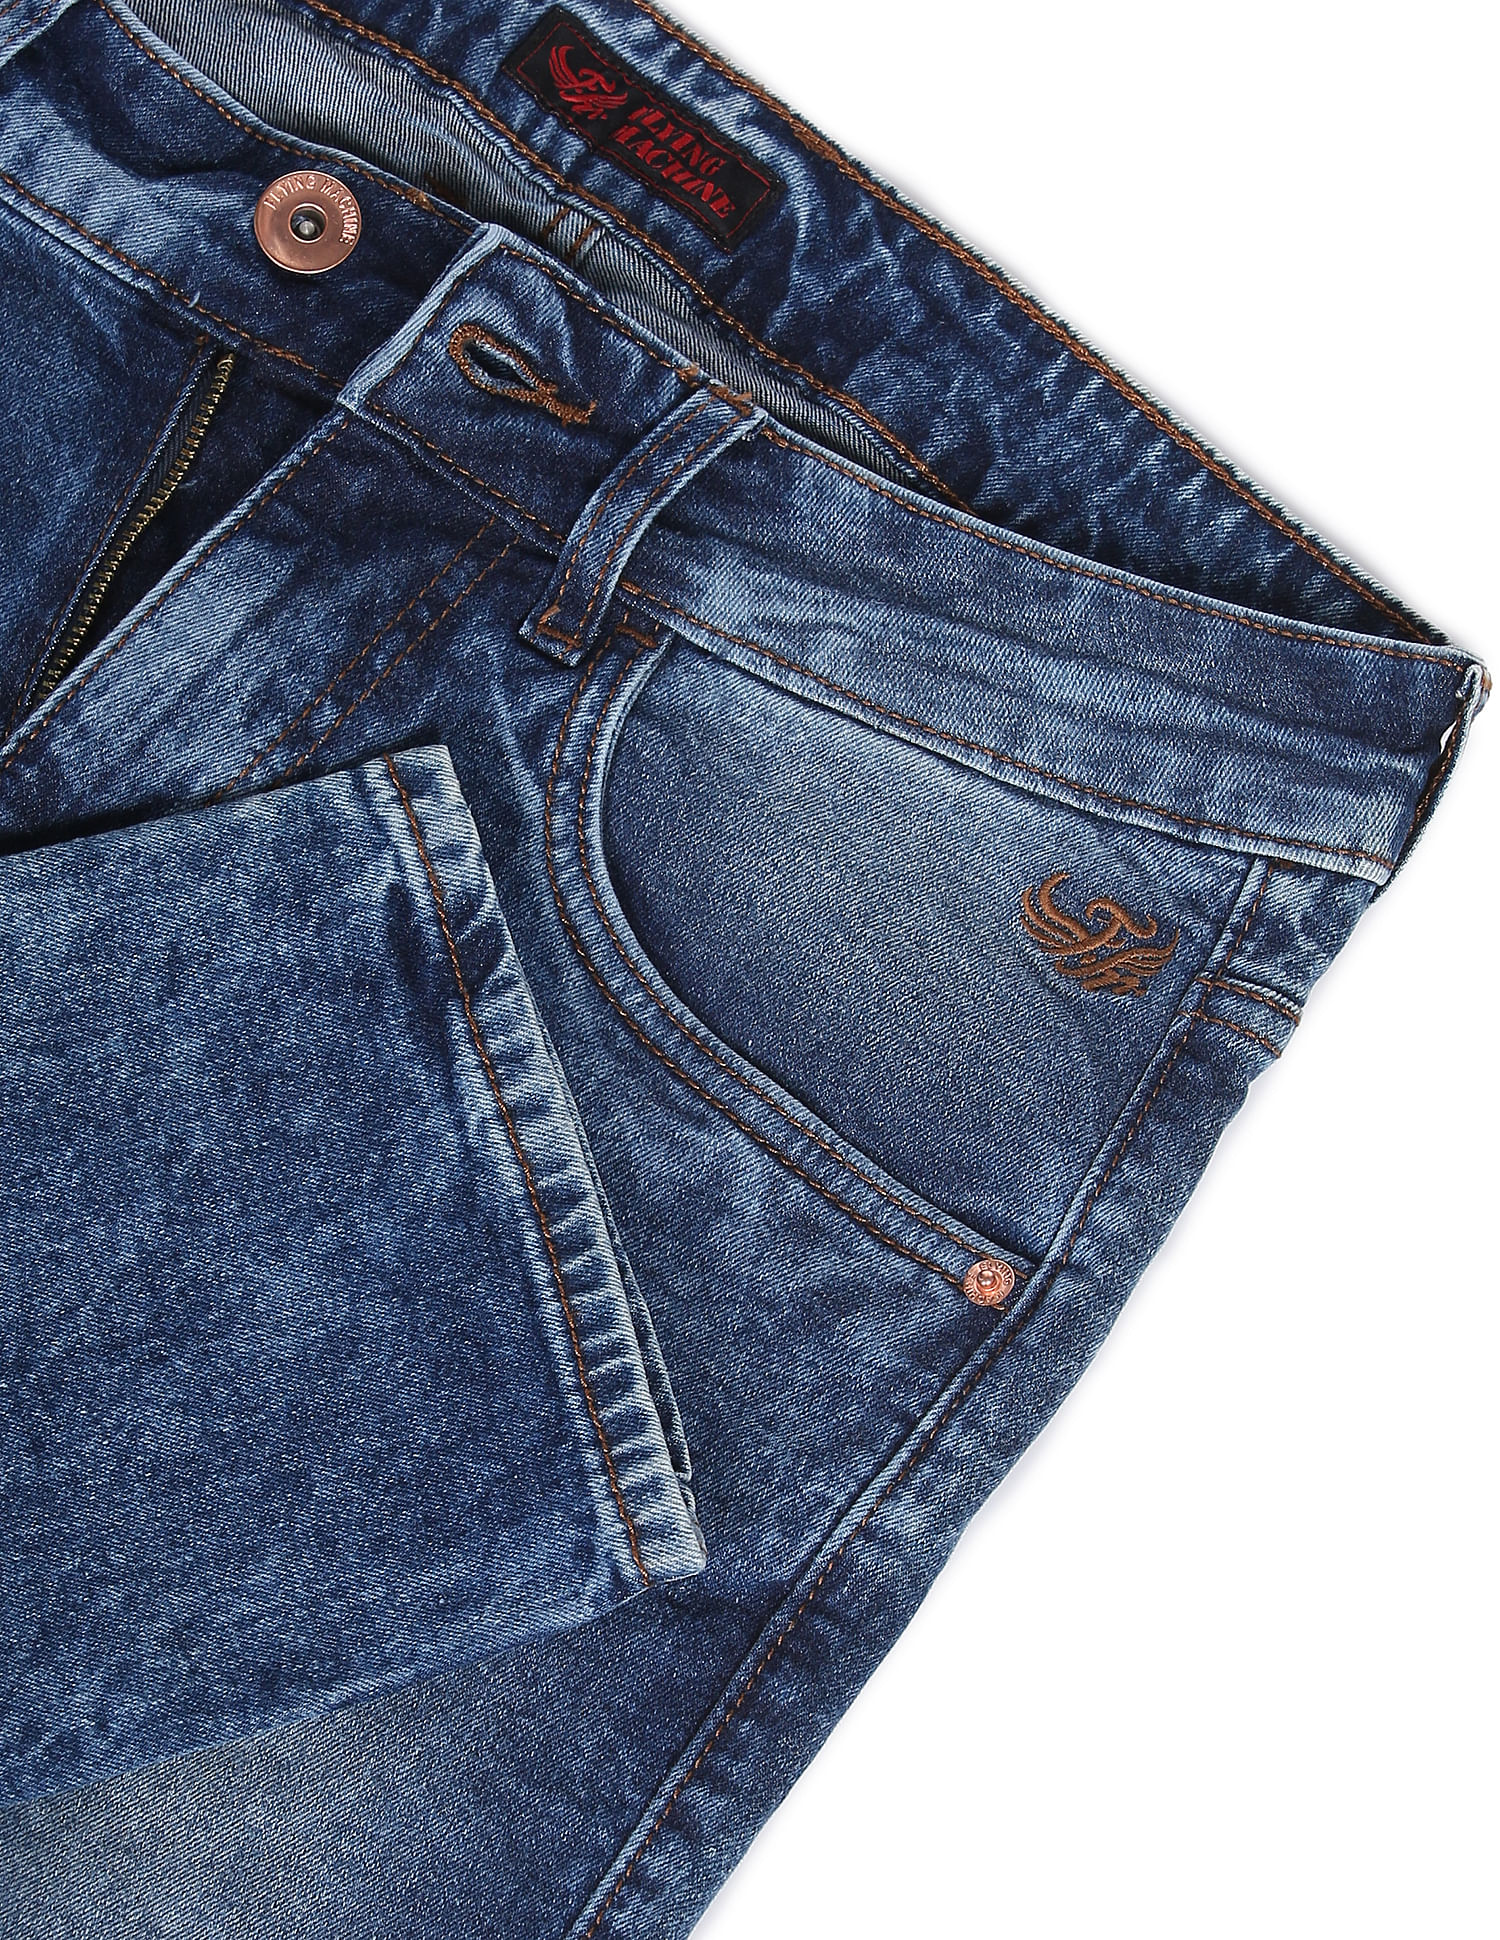 Buy Flying Machine Jeans from Online Shop in India  NNNOW